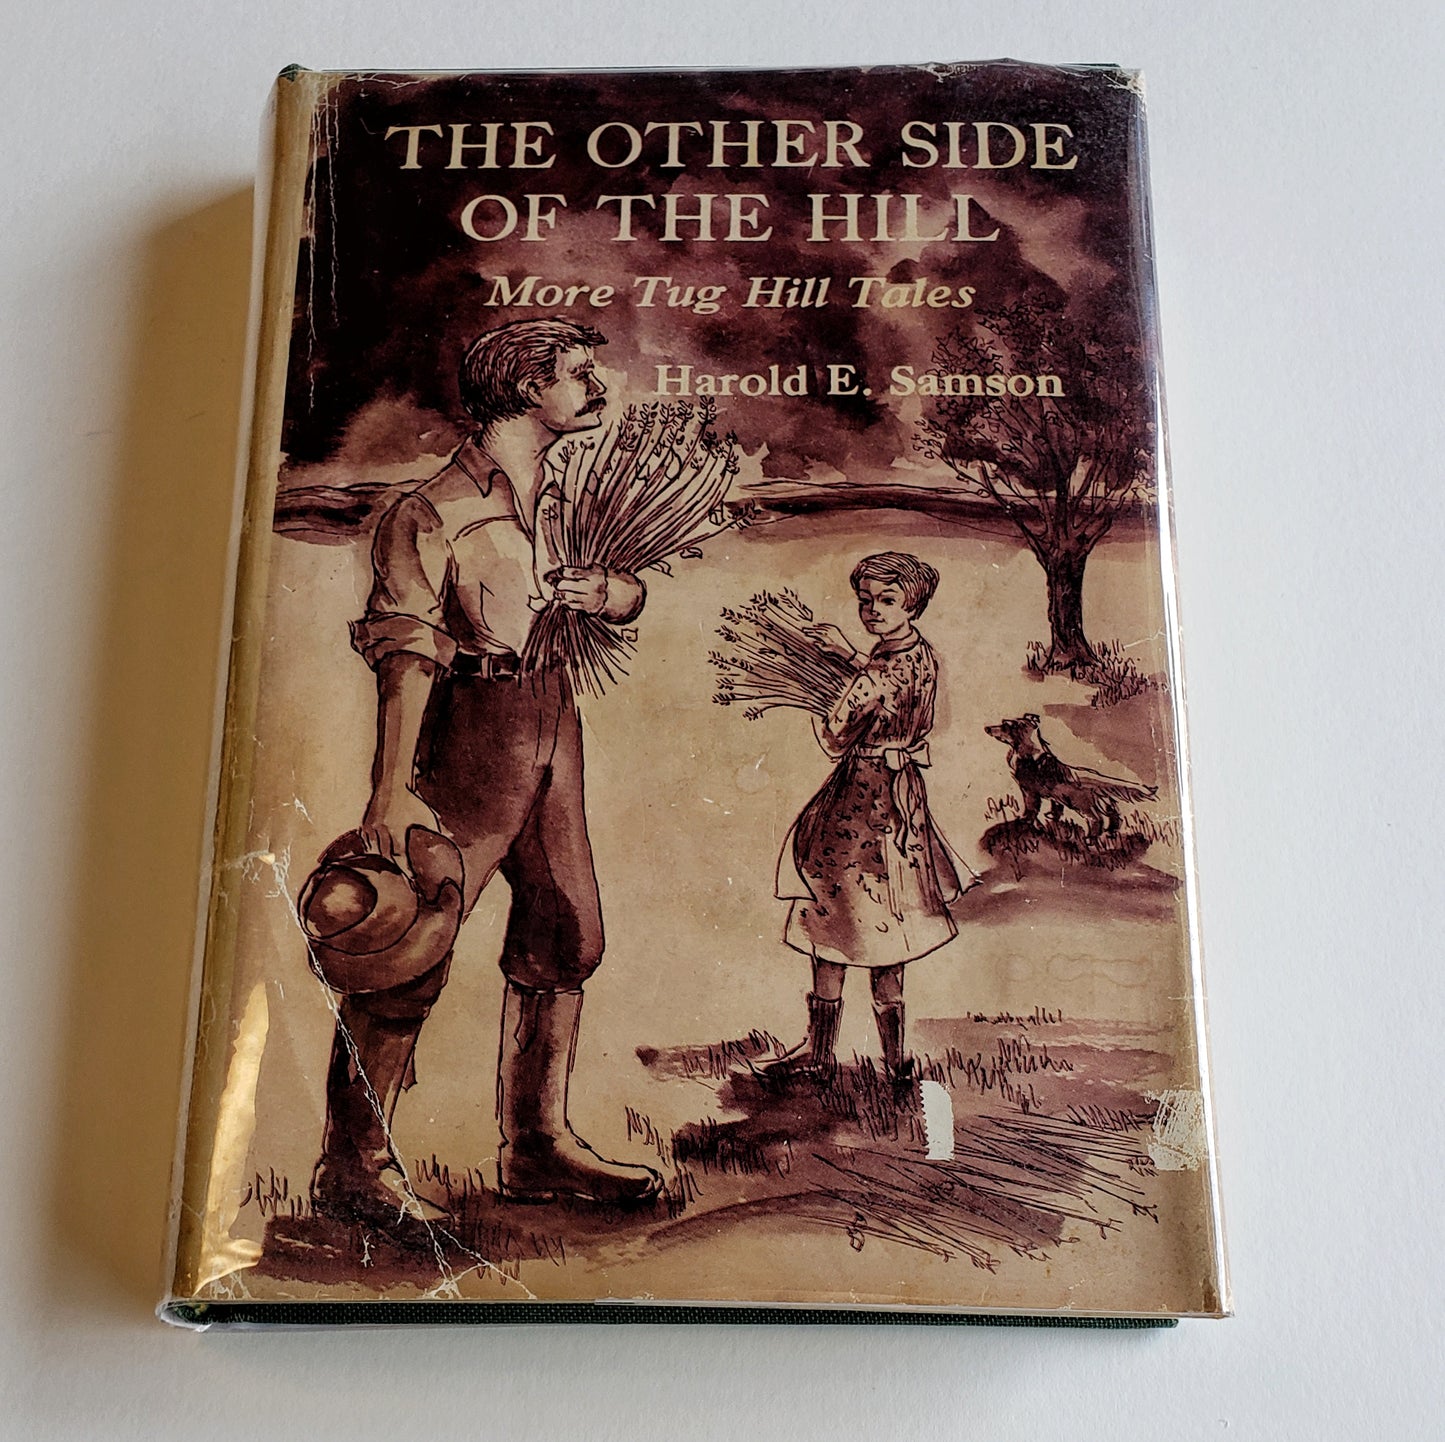 Vintage Book- The Other Side of the Hill: More Tug Hill Tales by Harold E. Samson (New York)